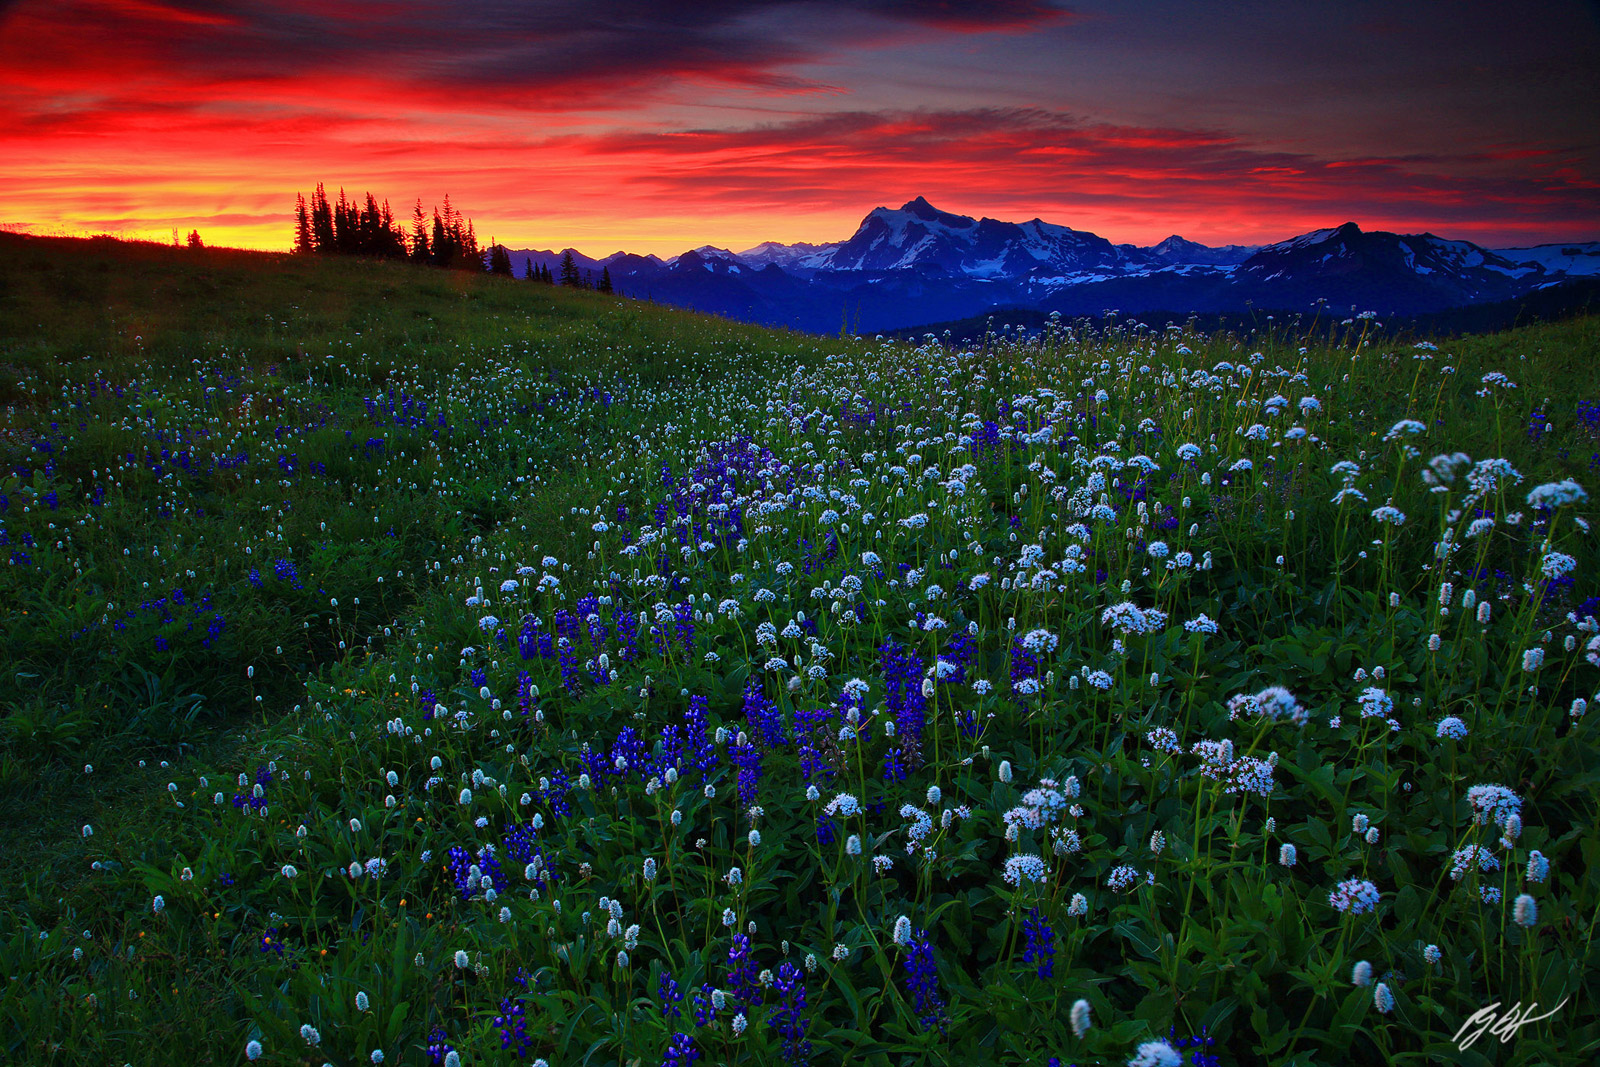 Sunrise Wildflowers and Mt Shuksan from Skyline Divide in the Mt Baker Wilderness in Washington